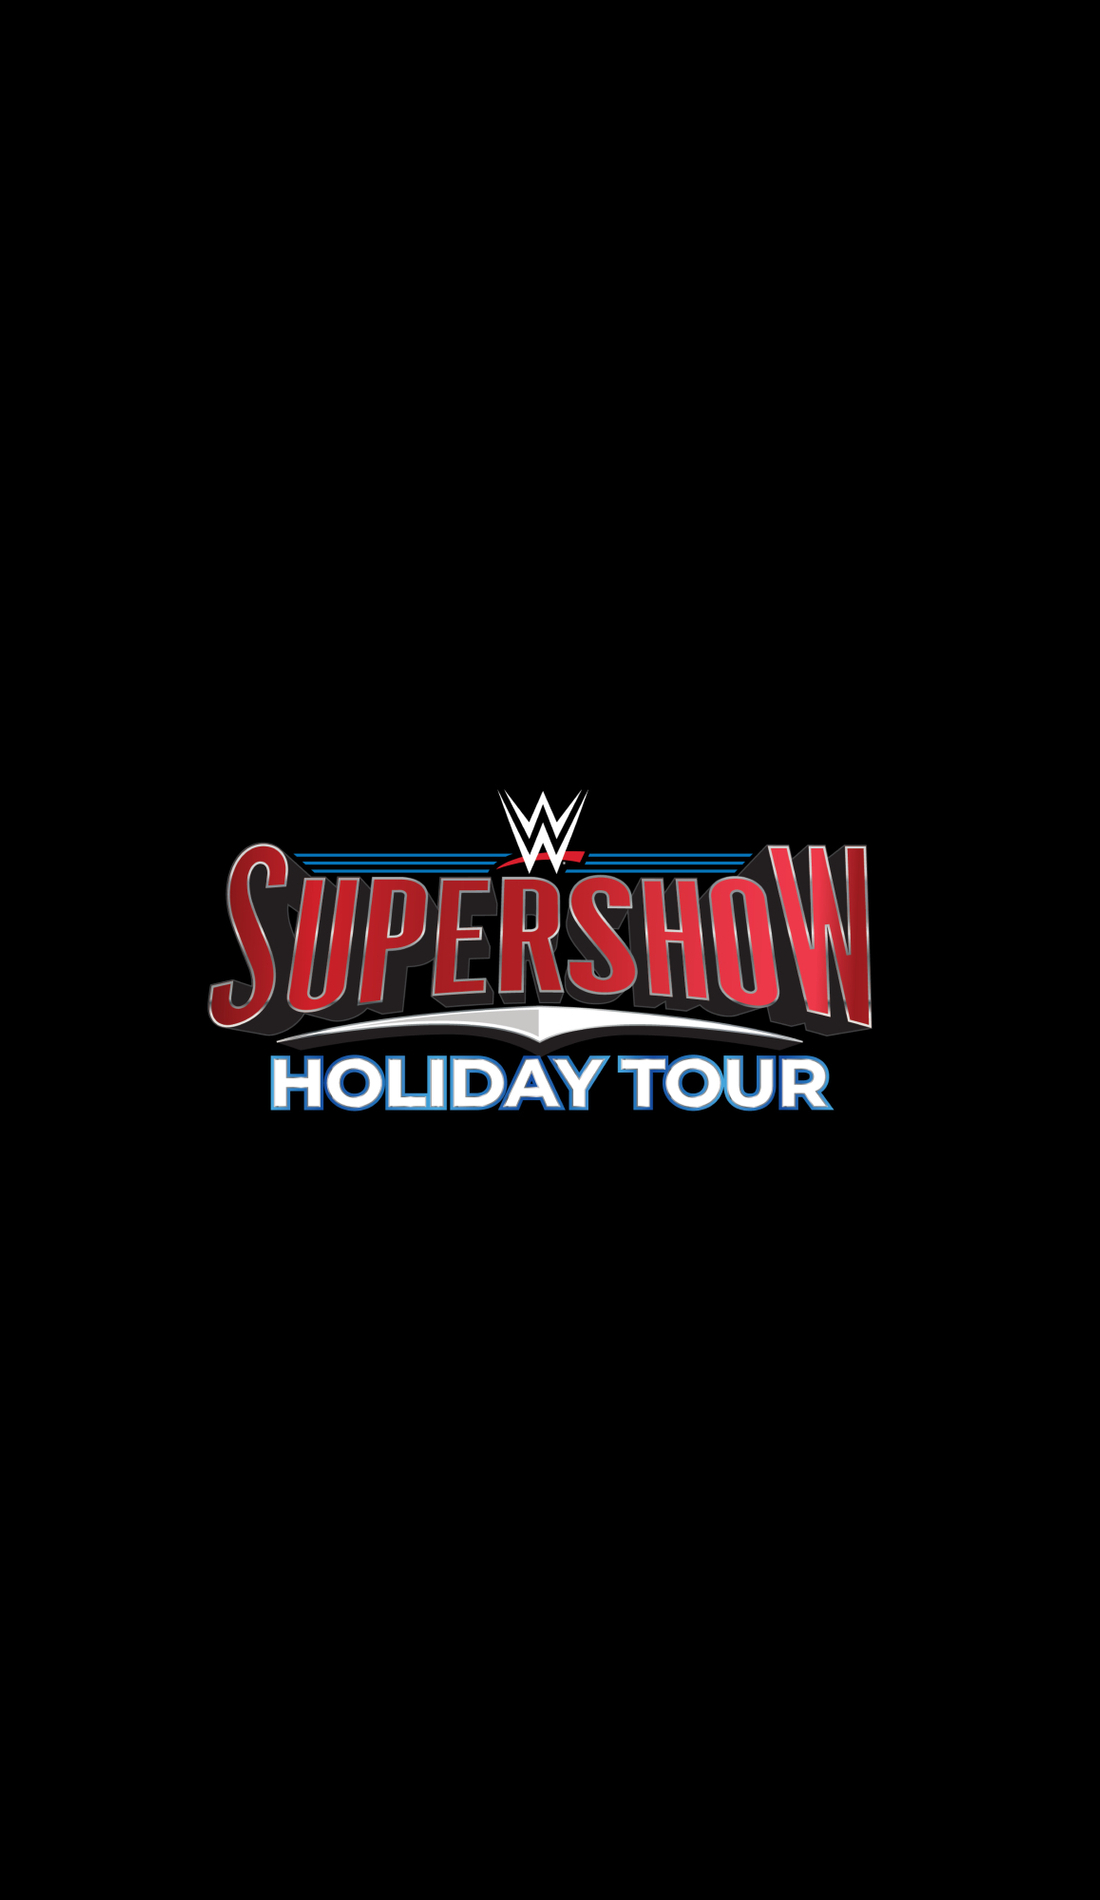 A WWE Supershow Holiday Tour live event